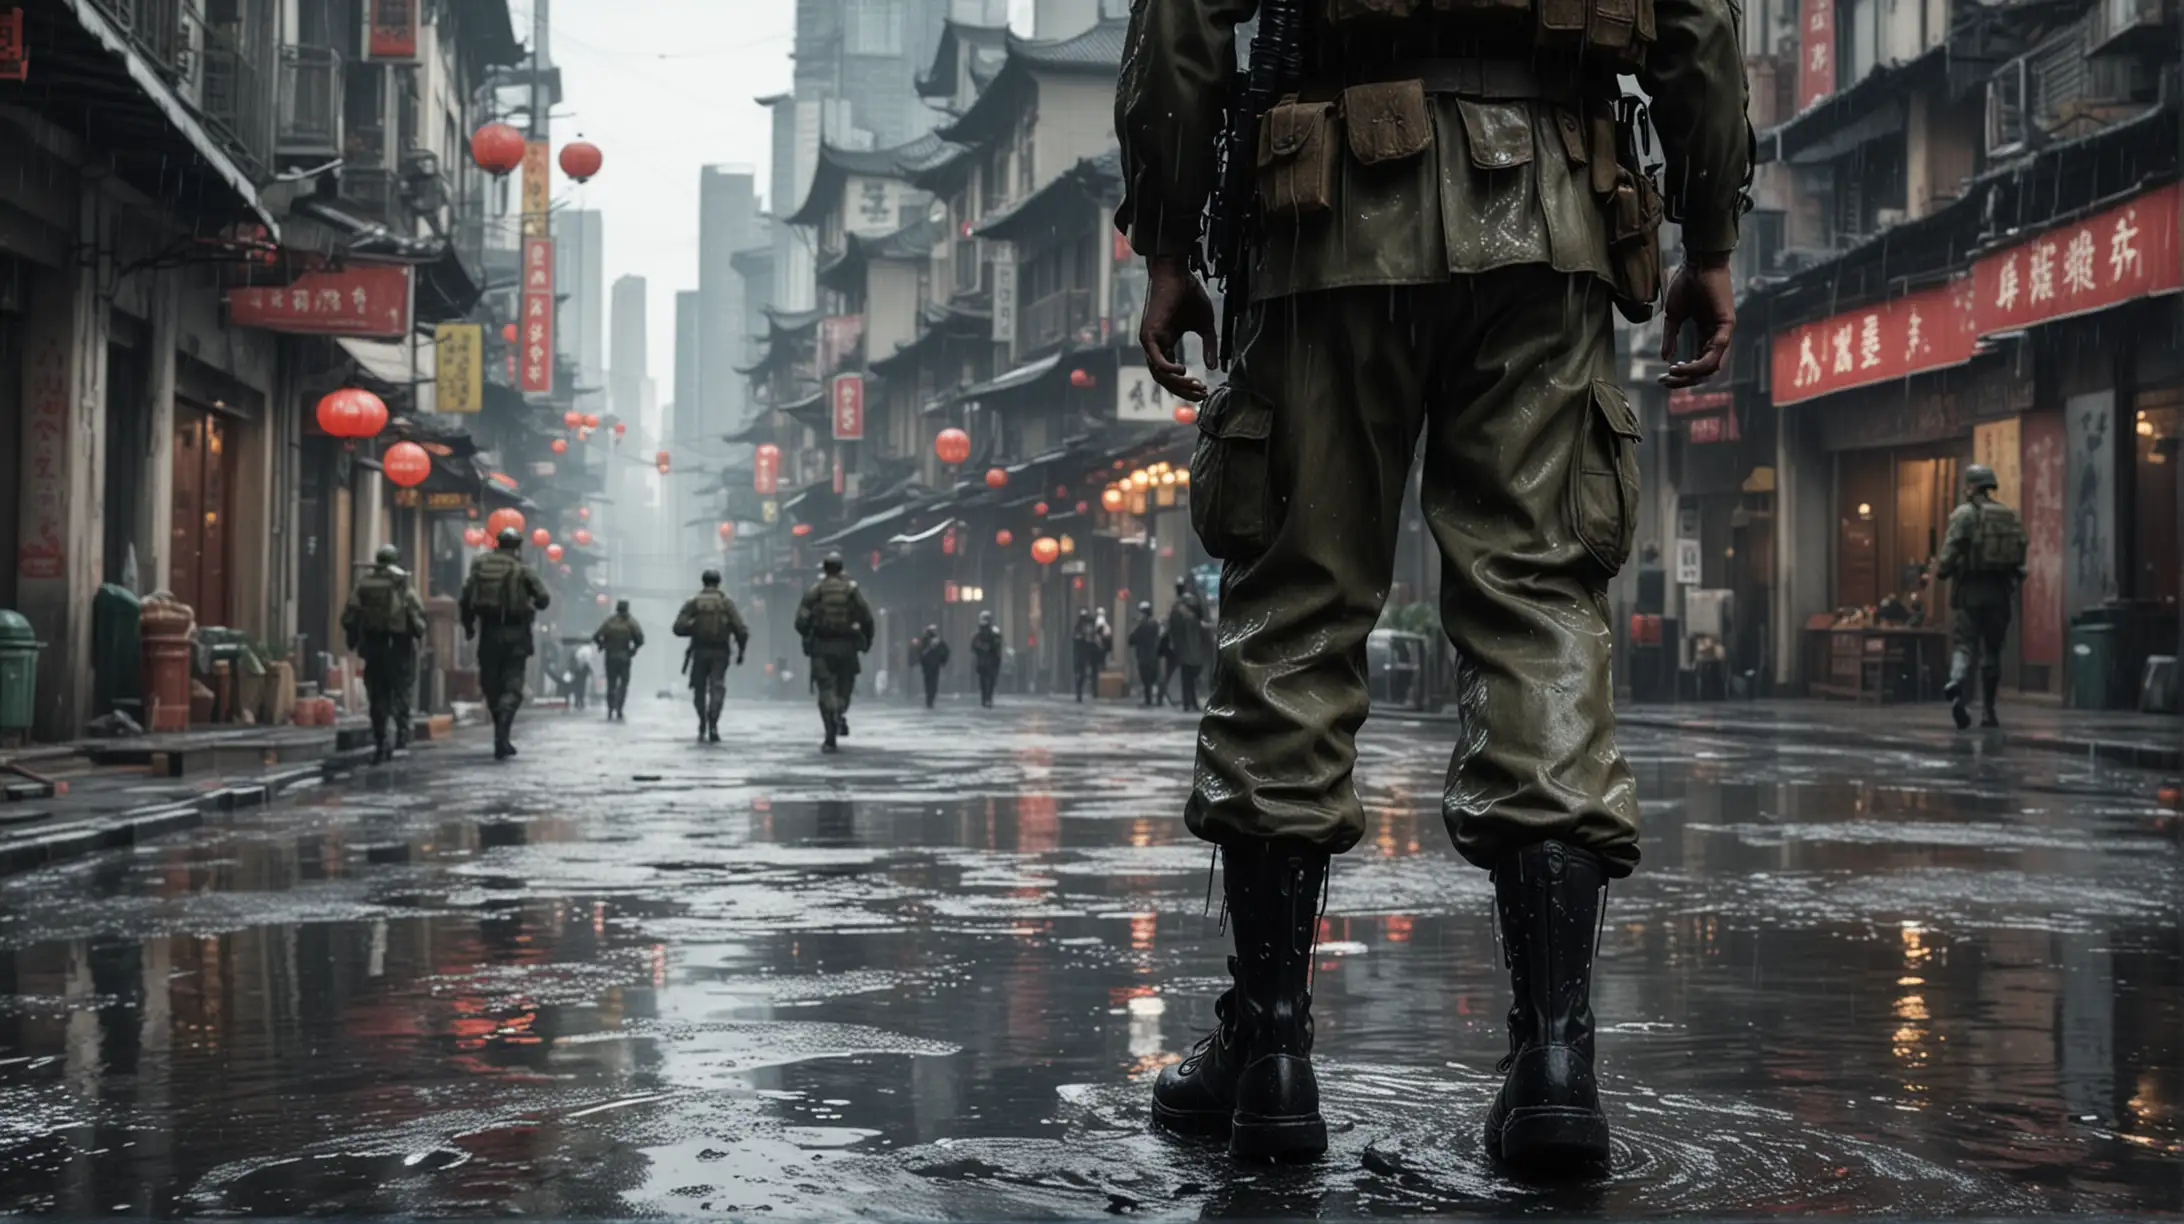 Generate a 4K hyperrealistic image depicting a soldier in a first person pov, of his squad walking around the wet street of shanghai china, generate the soldiers entire body